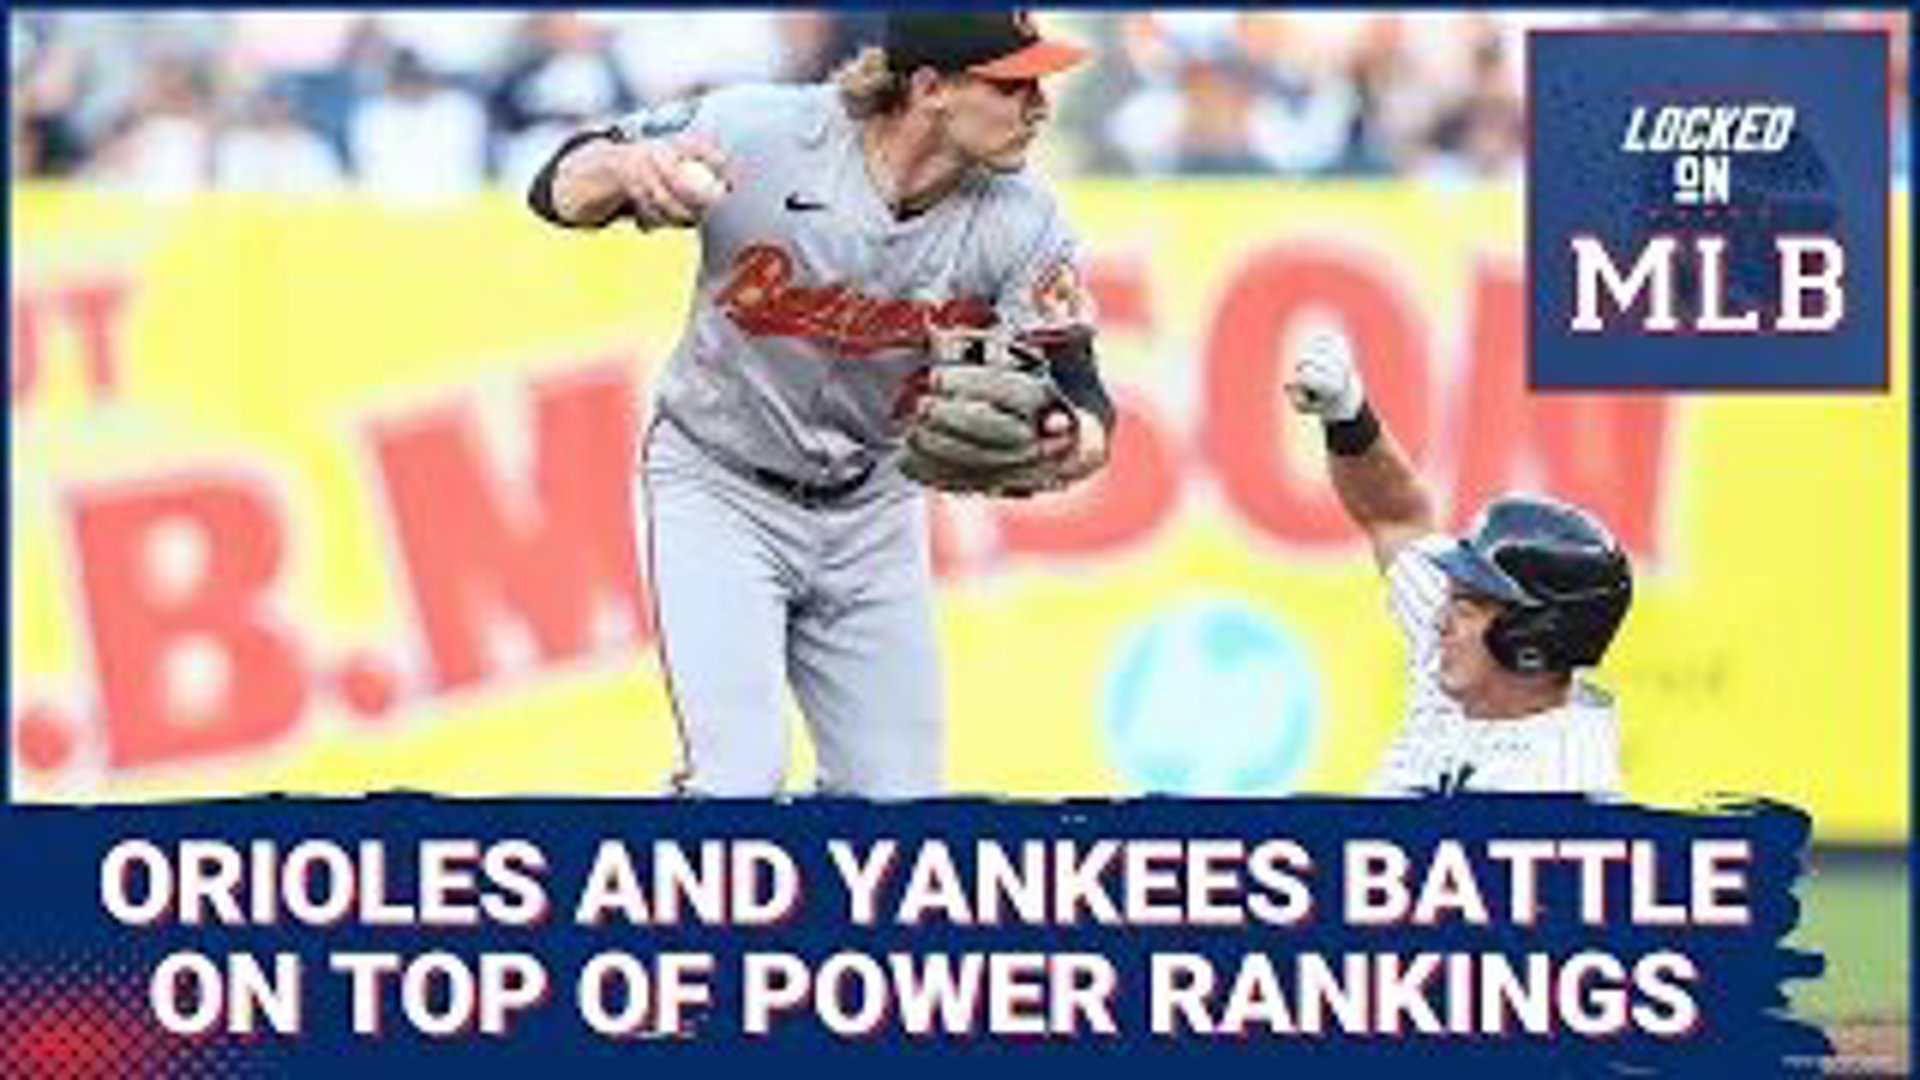 Yankees and Orioles Battle At Top of Power Rankings